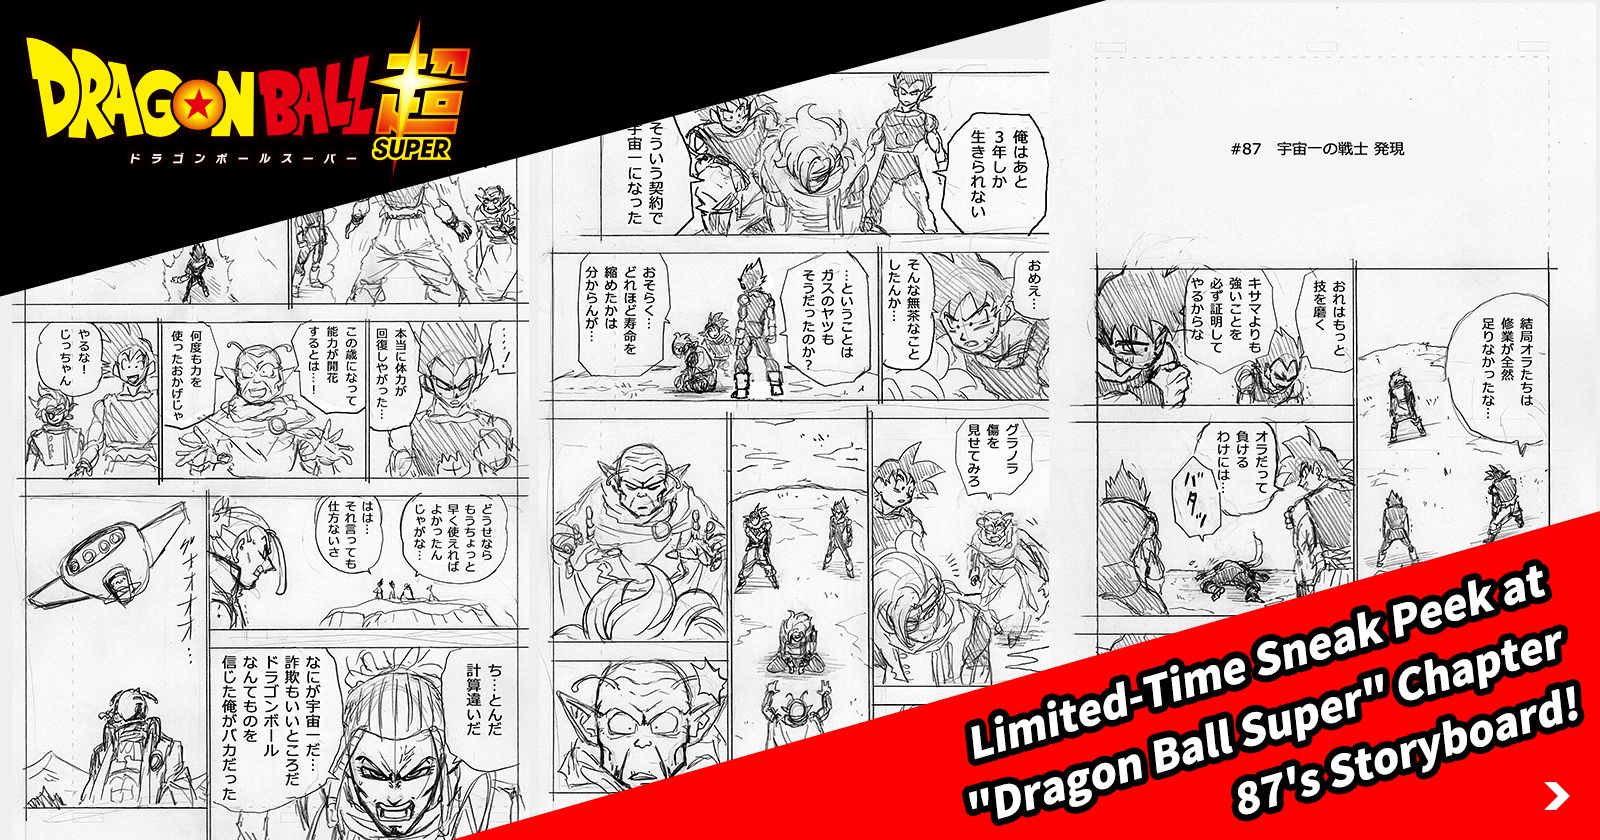 Limited-Time Sneak Peek at Dragon Ball Super Chapter 87's Storyboard! Get a Preview of the Chapter Releasing in V Jump's Super-Sized October Edition!